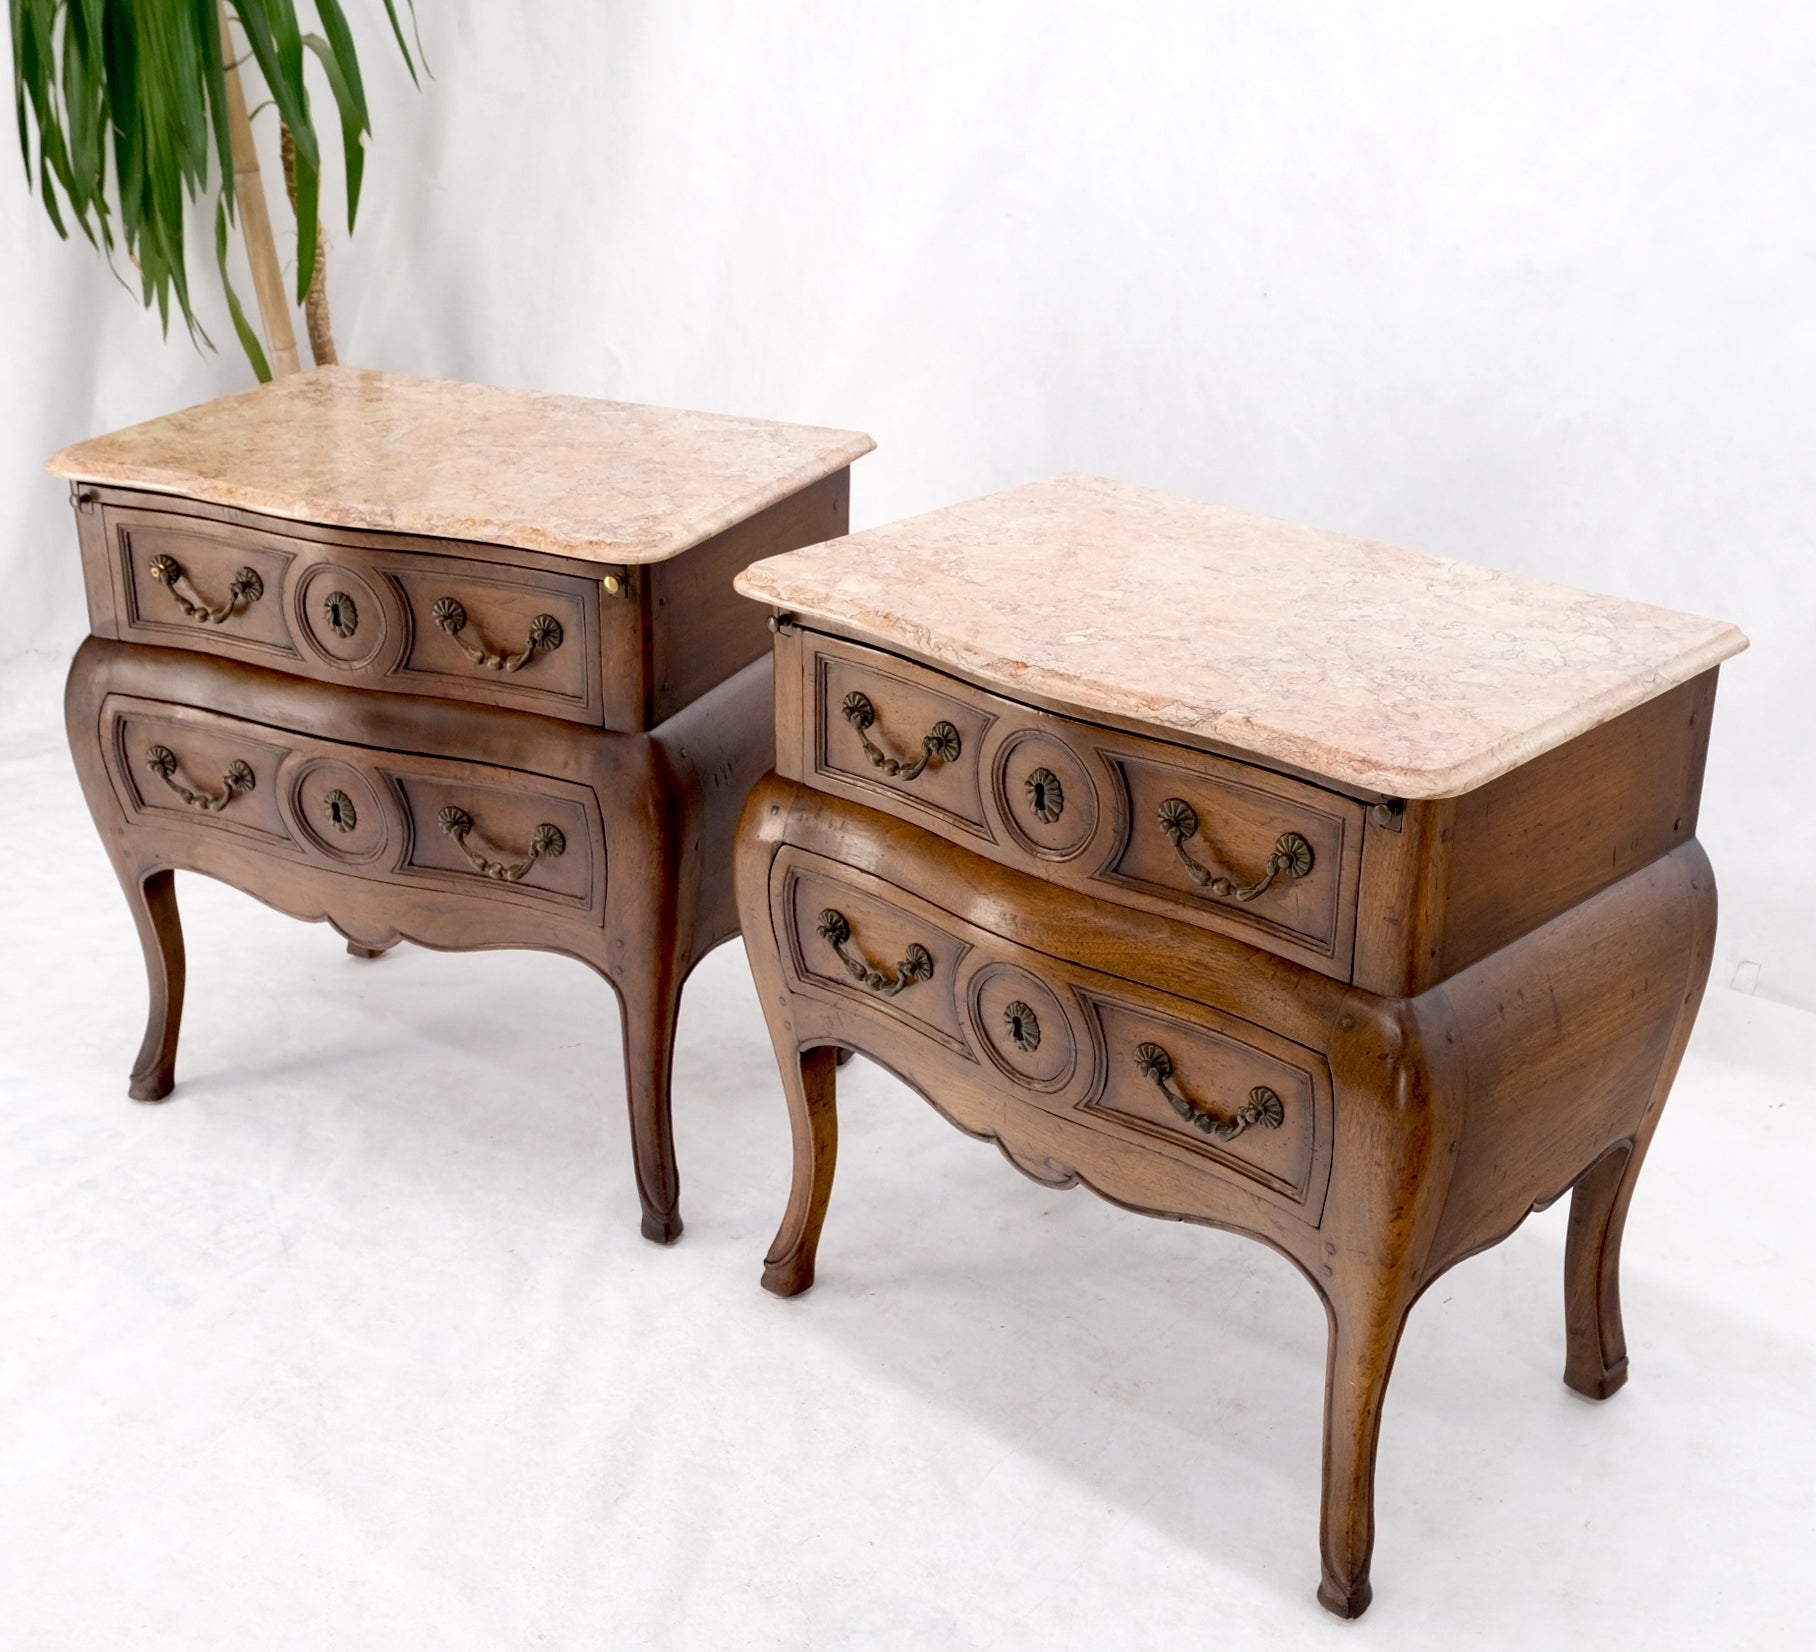 Pair Spanish Colonial / Country French Custom Bombe Shape Peg Joints Rouge Marble Top Brass Drop Pulls 2 Drawer Night Stands End Side Tables.